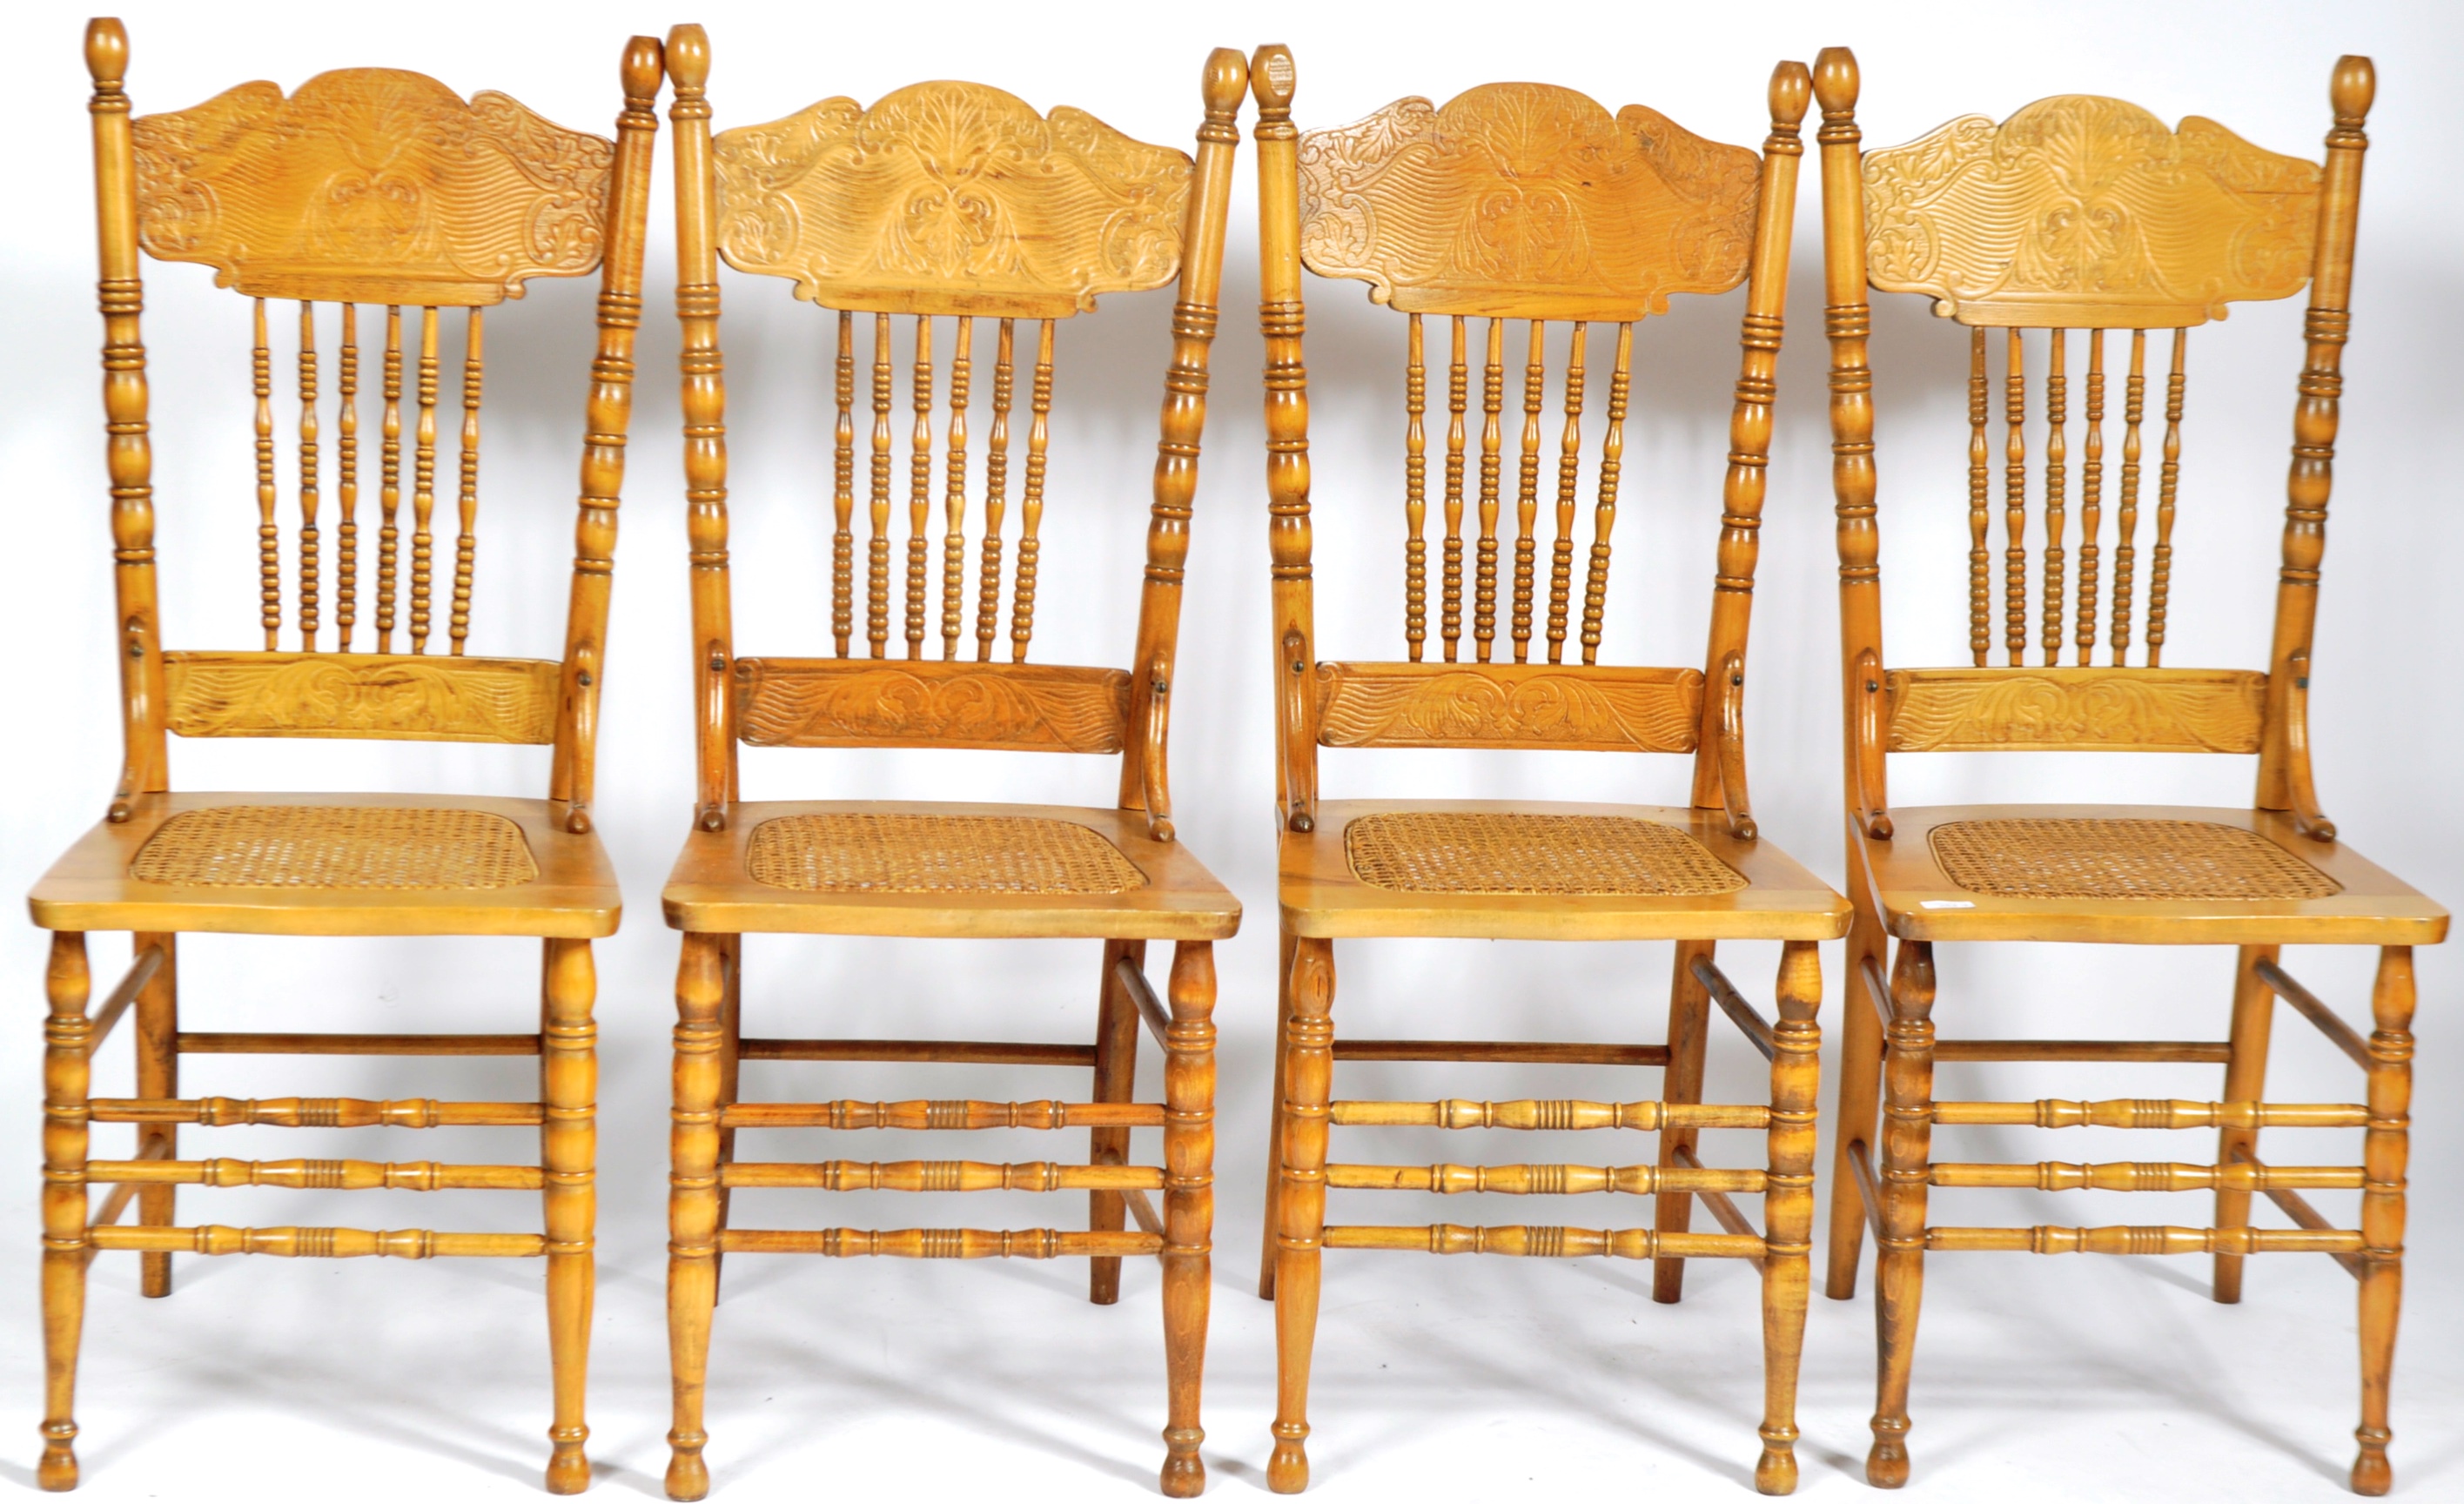 SET OF 12 EARLY 20TH CENTURY AMERICAN LARKIN PRESS BACK DINING CHAIRS - Image 3 of 8